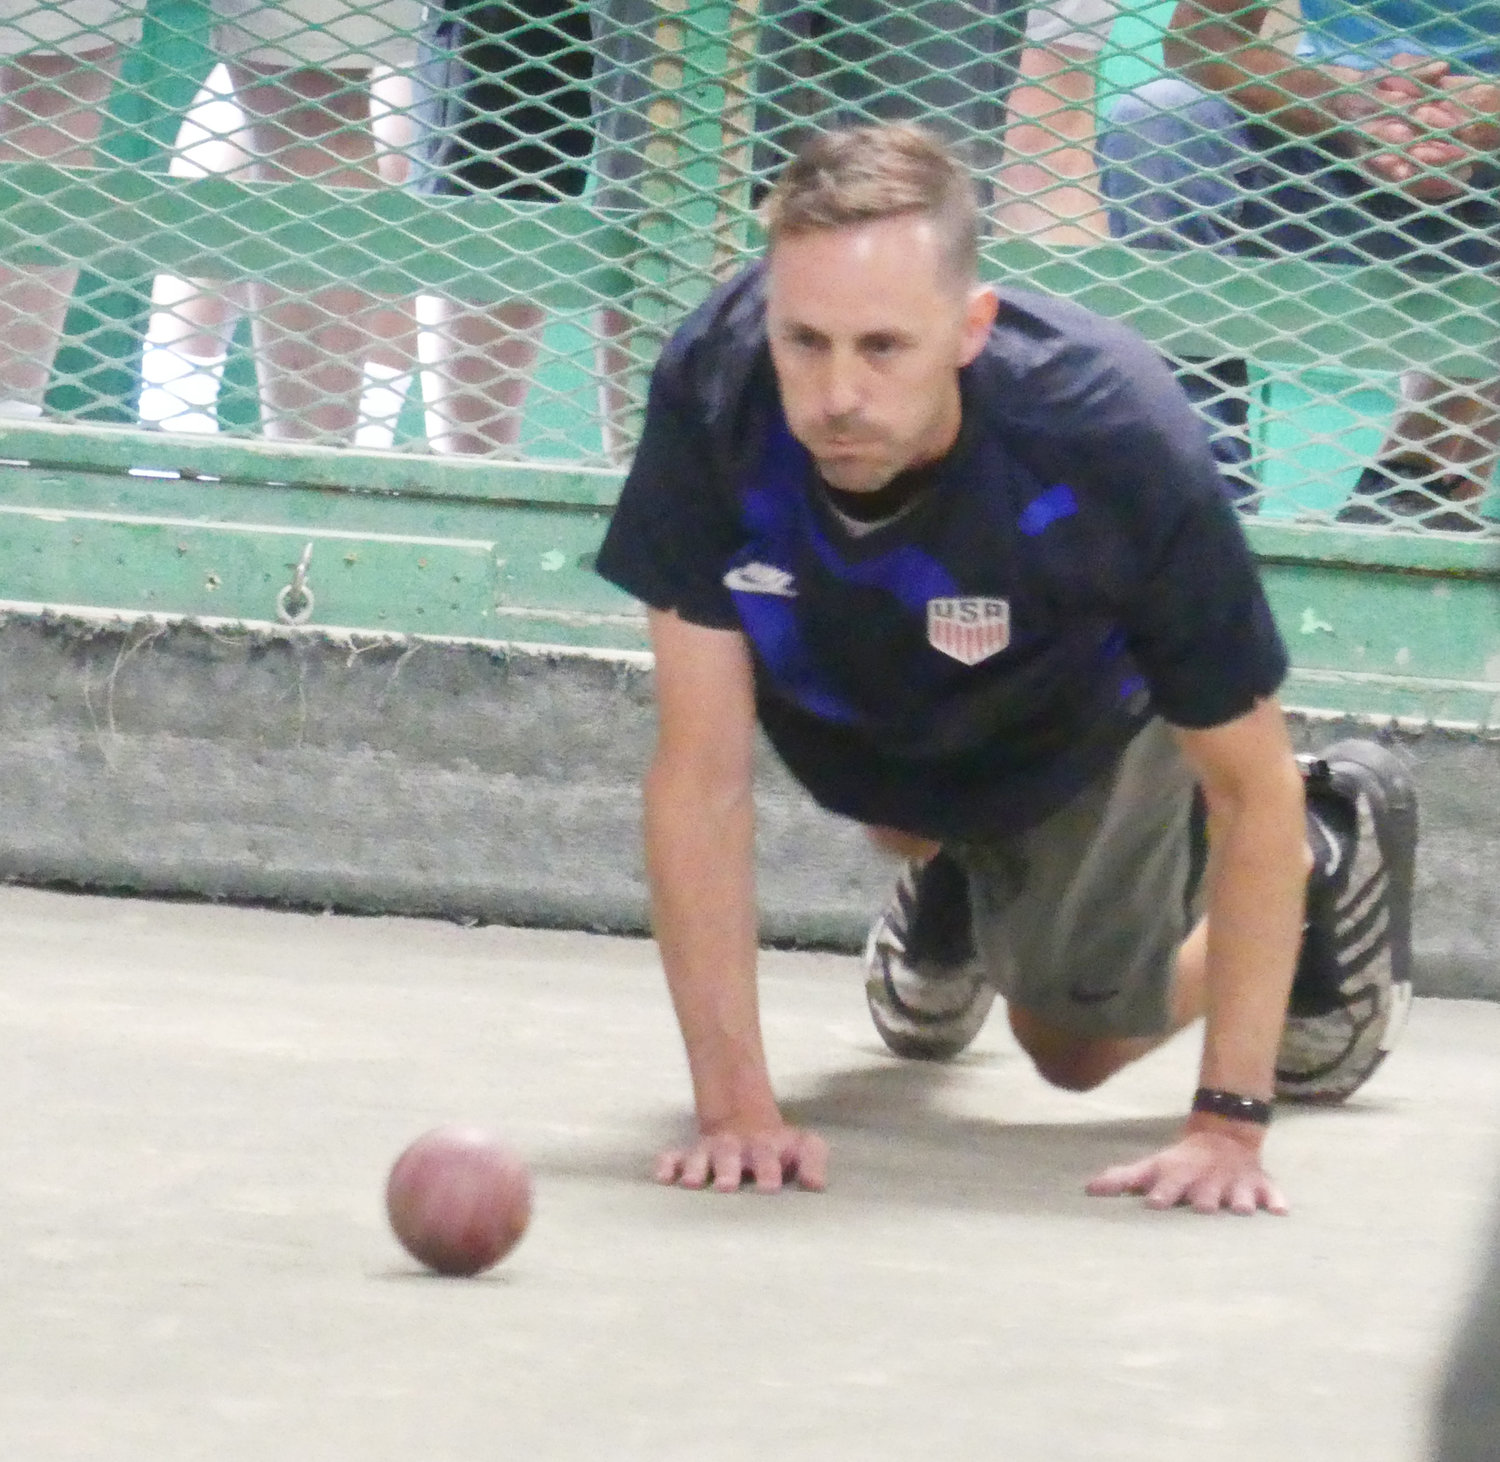 Joe Zdesar gets in position for a shot Friday during his team's match against Versace Law Office at the Toccolana Club in Rome. Zdesar, who is from Cleveland, Ohio, was part of a team named ABV competing in the 47th World Series of Bocce.